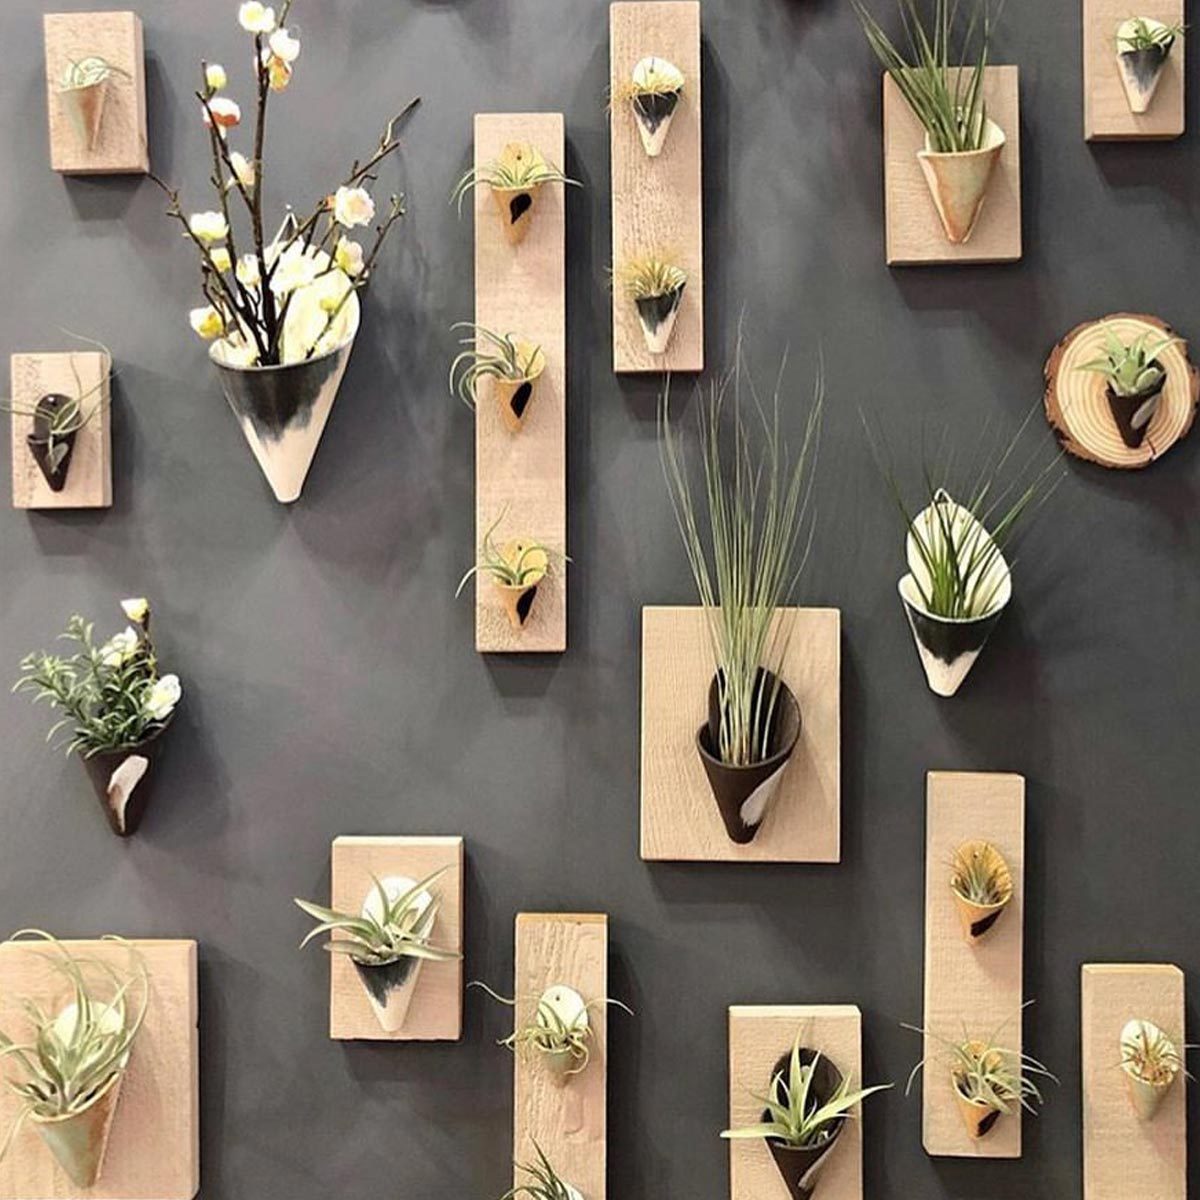 10 DIY Wall Art Projects For The Outdoors